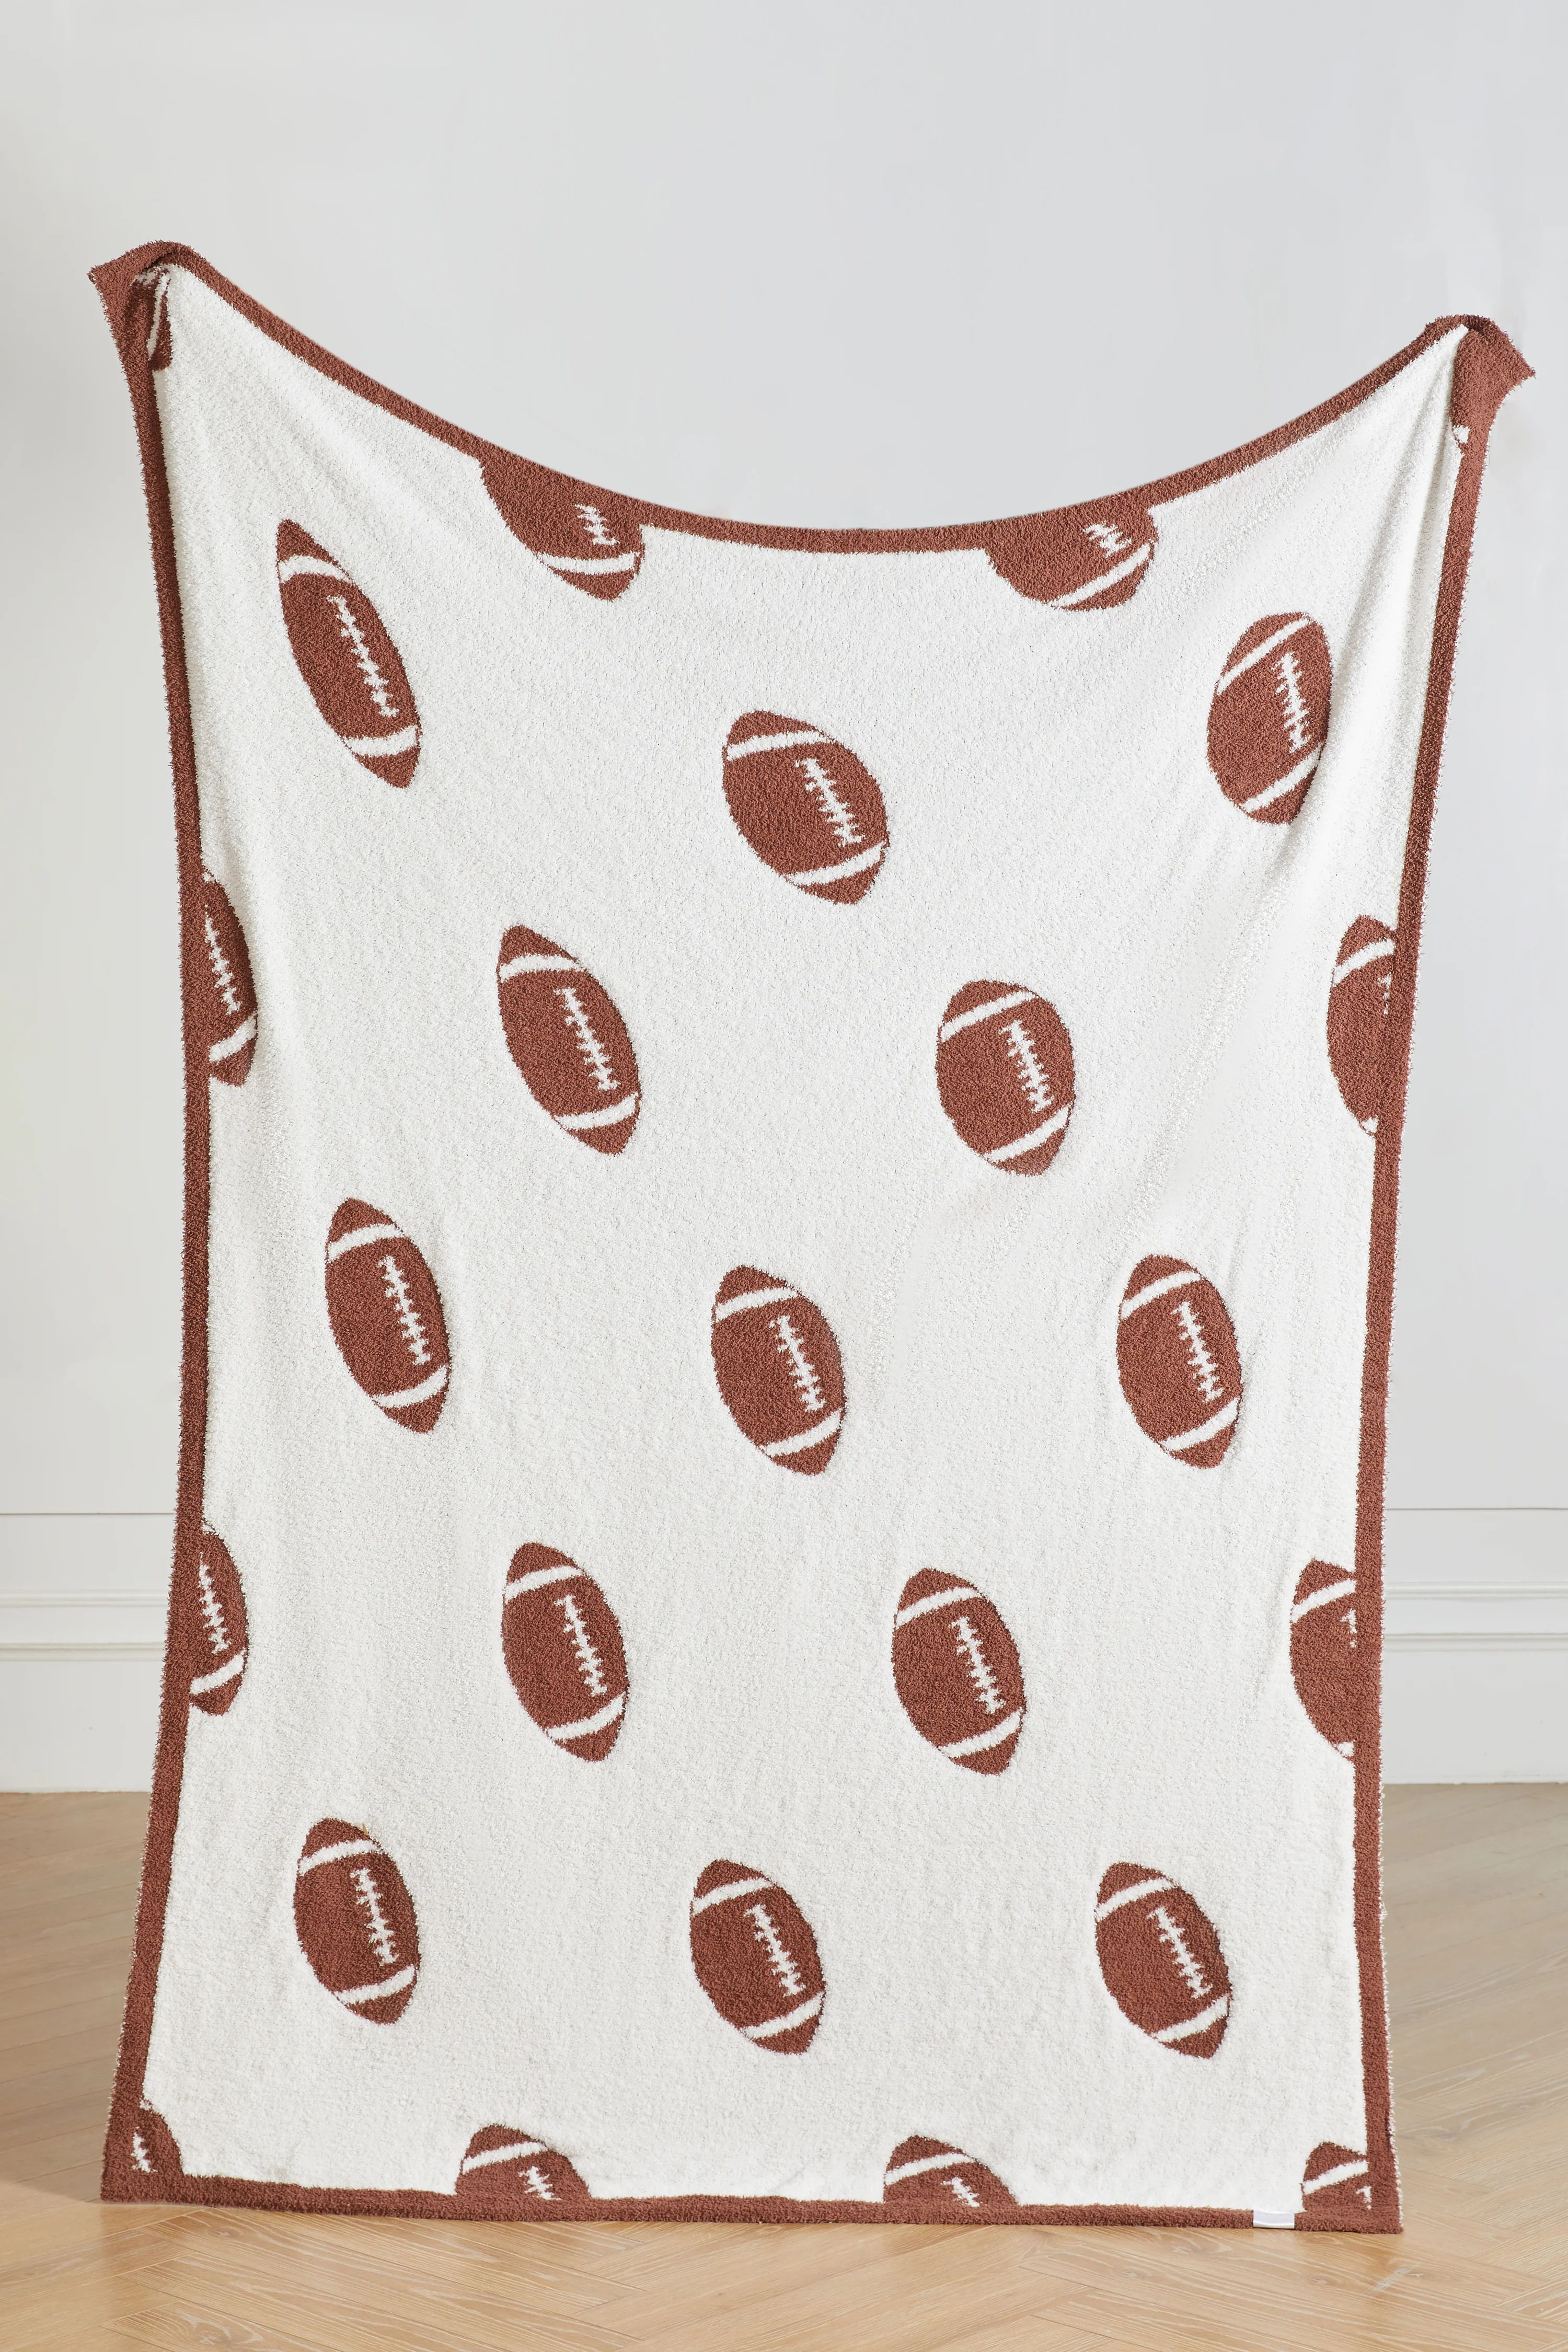 Football Buttery Blanket- Pre Order 3-31 | The Styled Collection